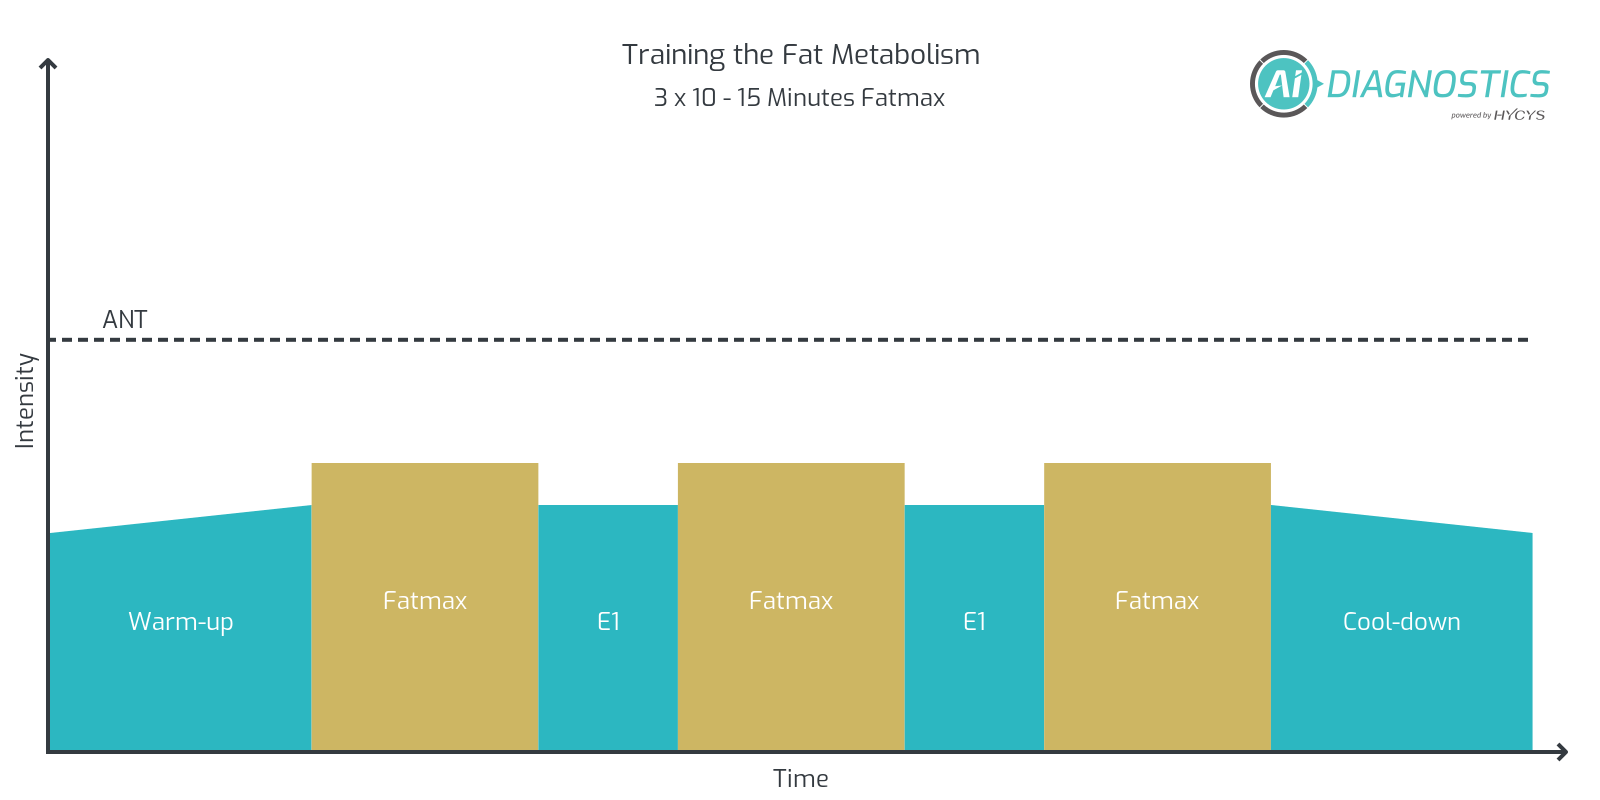 Training Session:10- to 15-Minute Fatmax Intervals to Improve Fat Metabolism